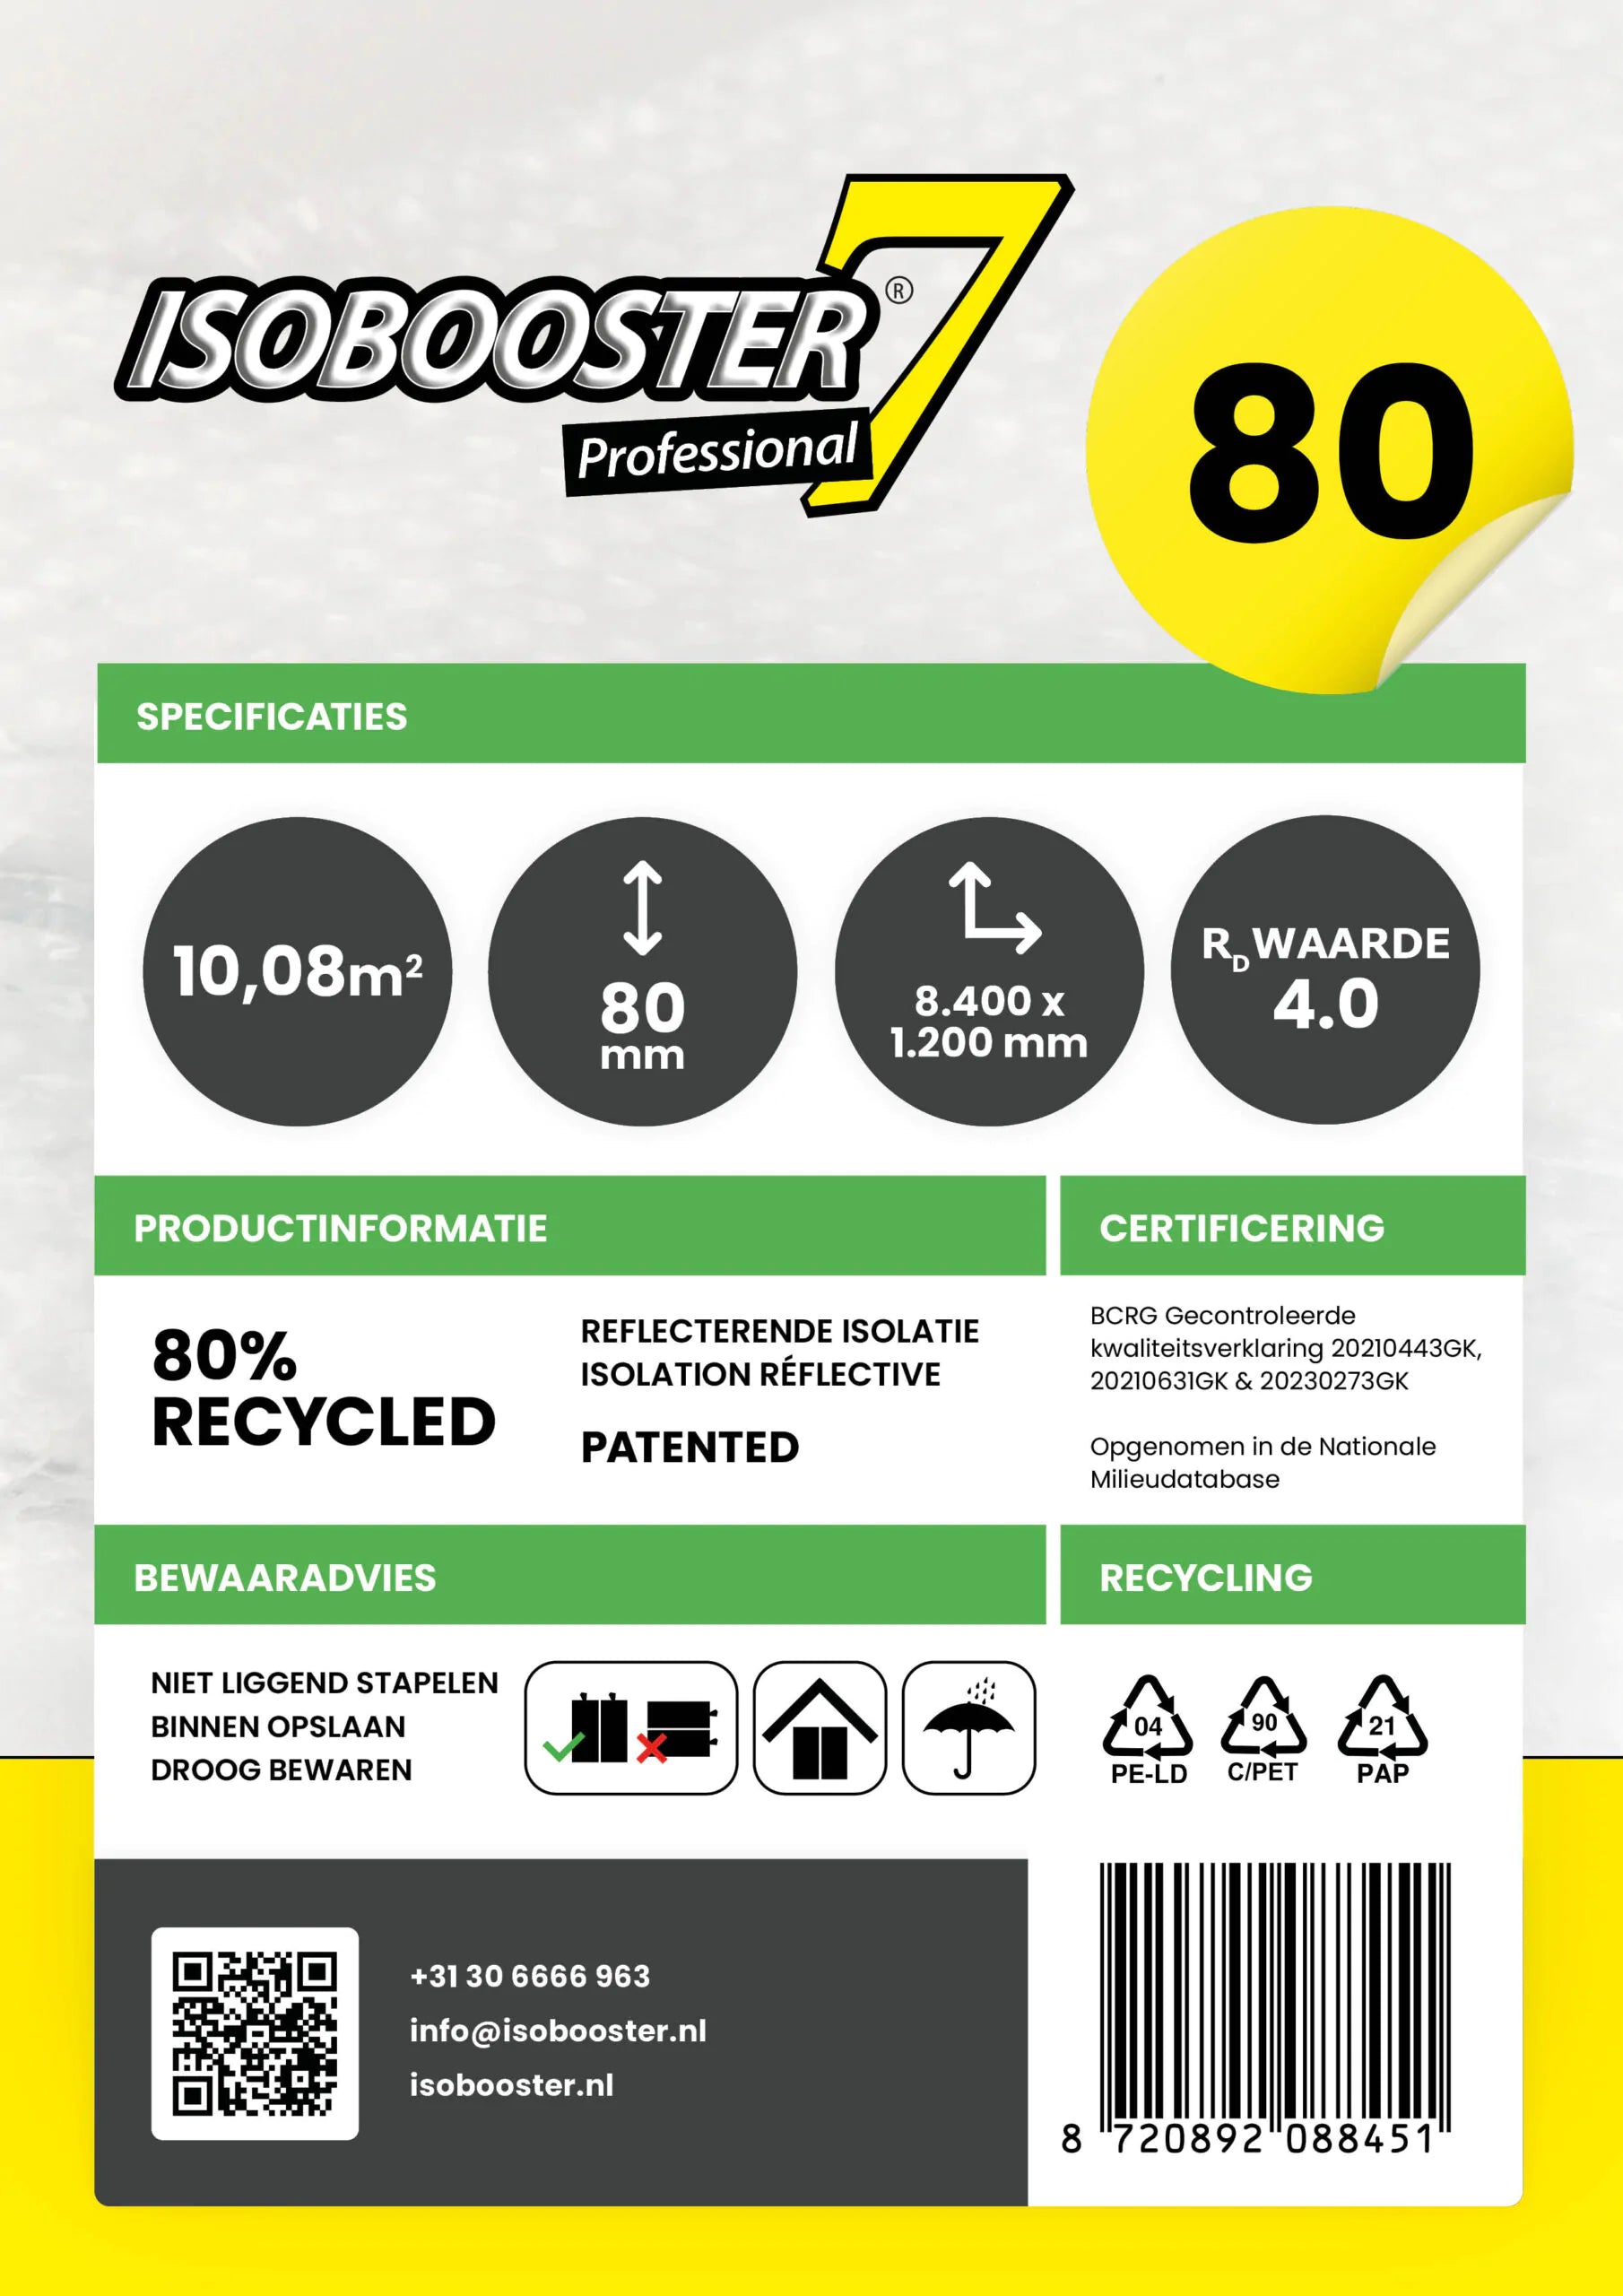 Isobooster Professional 80mm